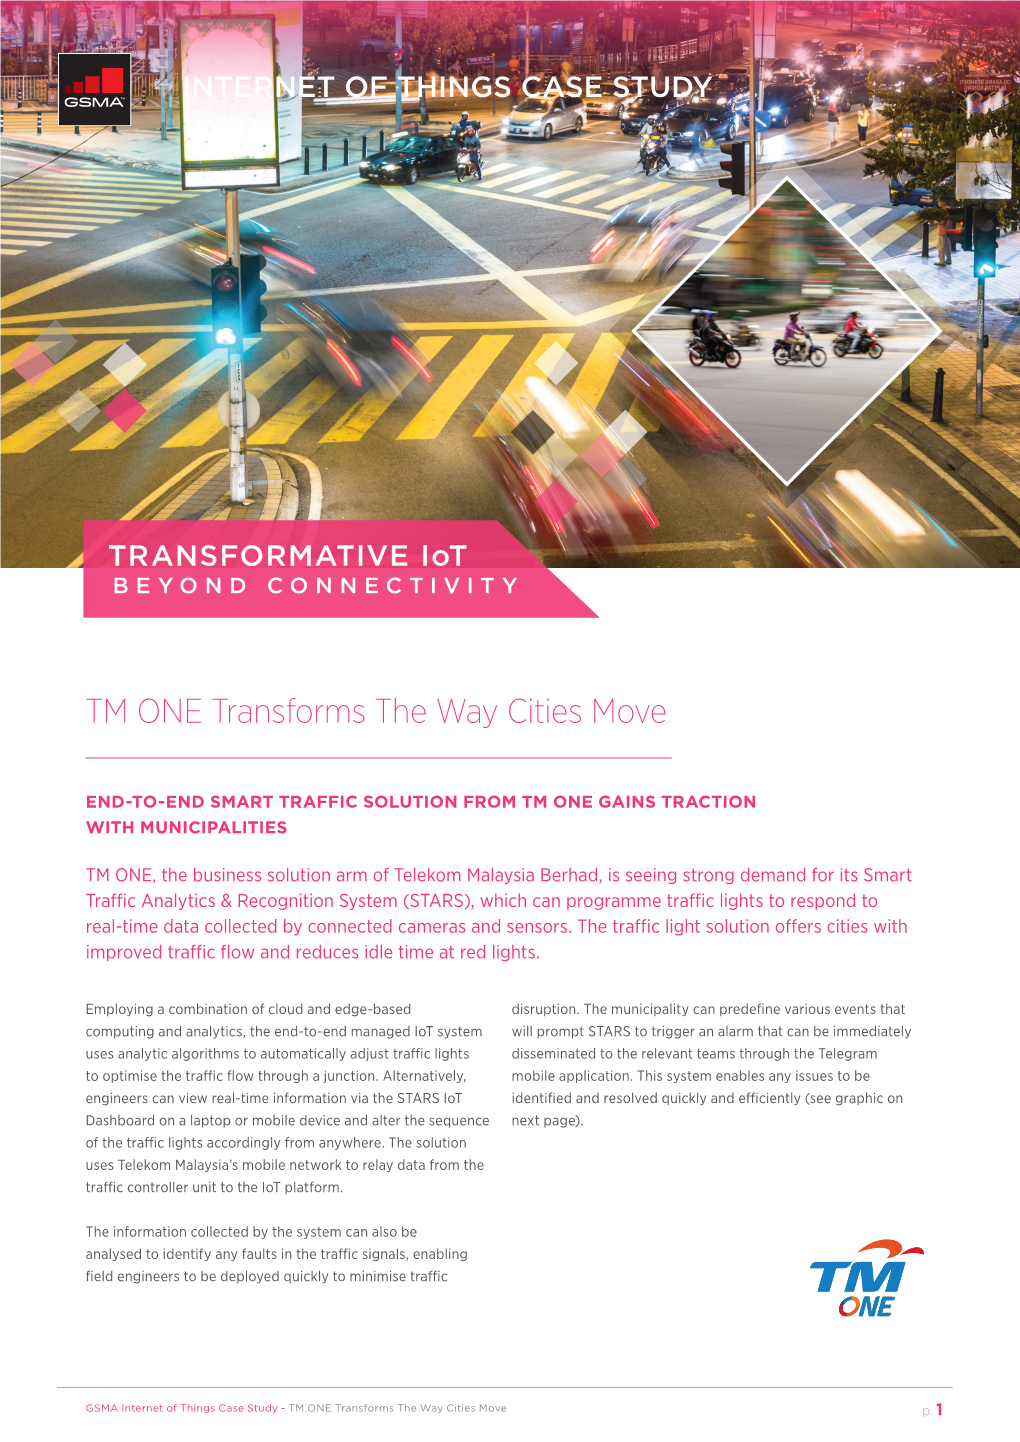 Case Study: TM ONE Transforms the Way Cities Move